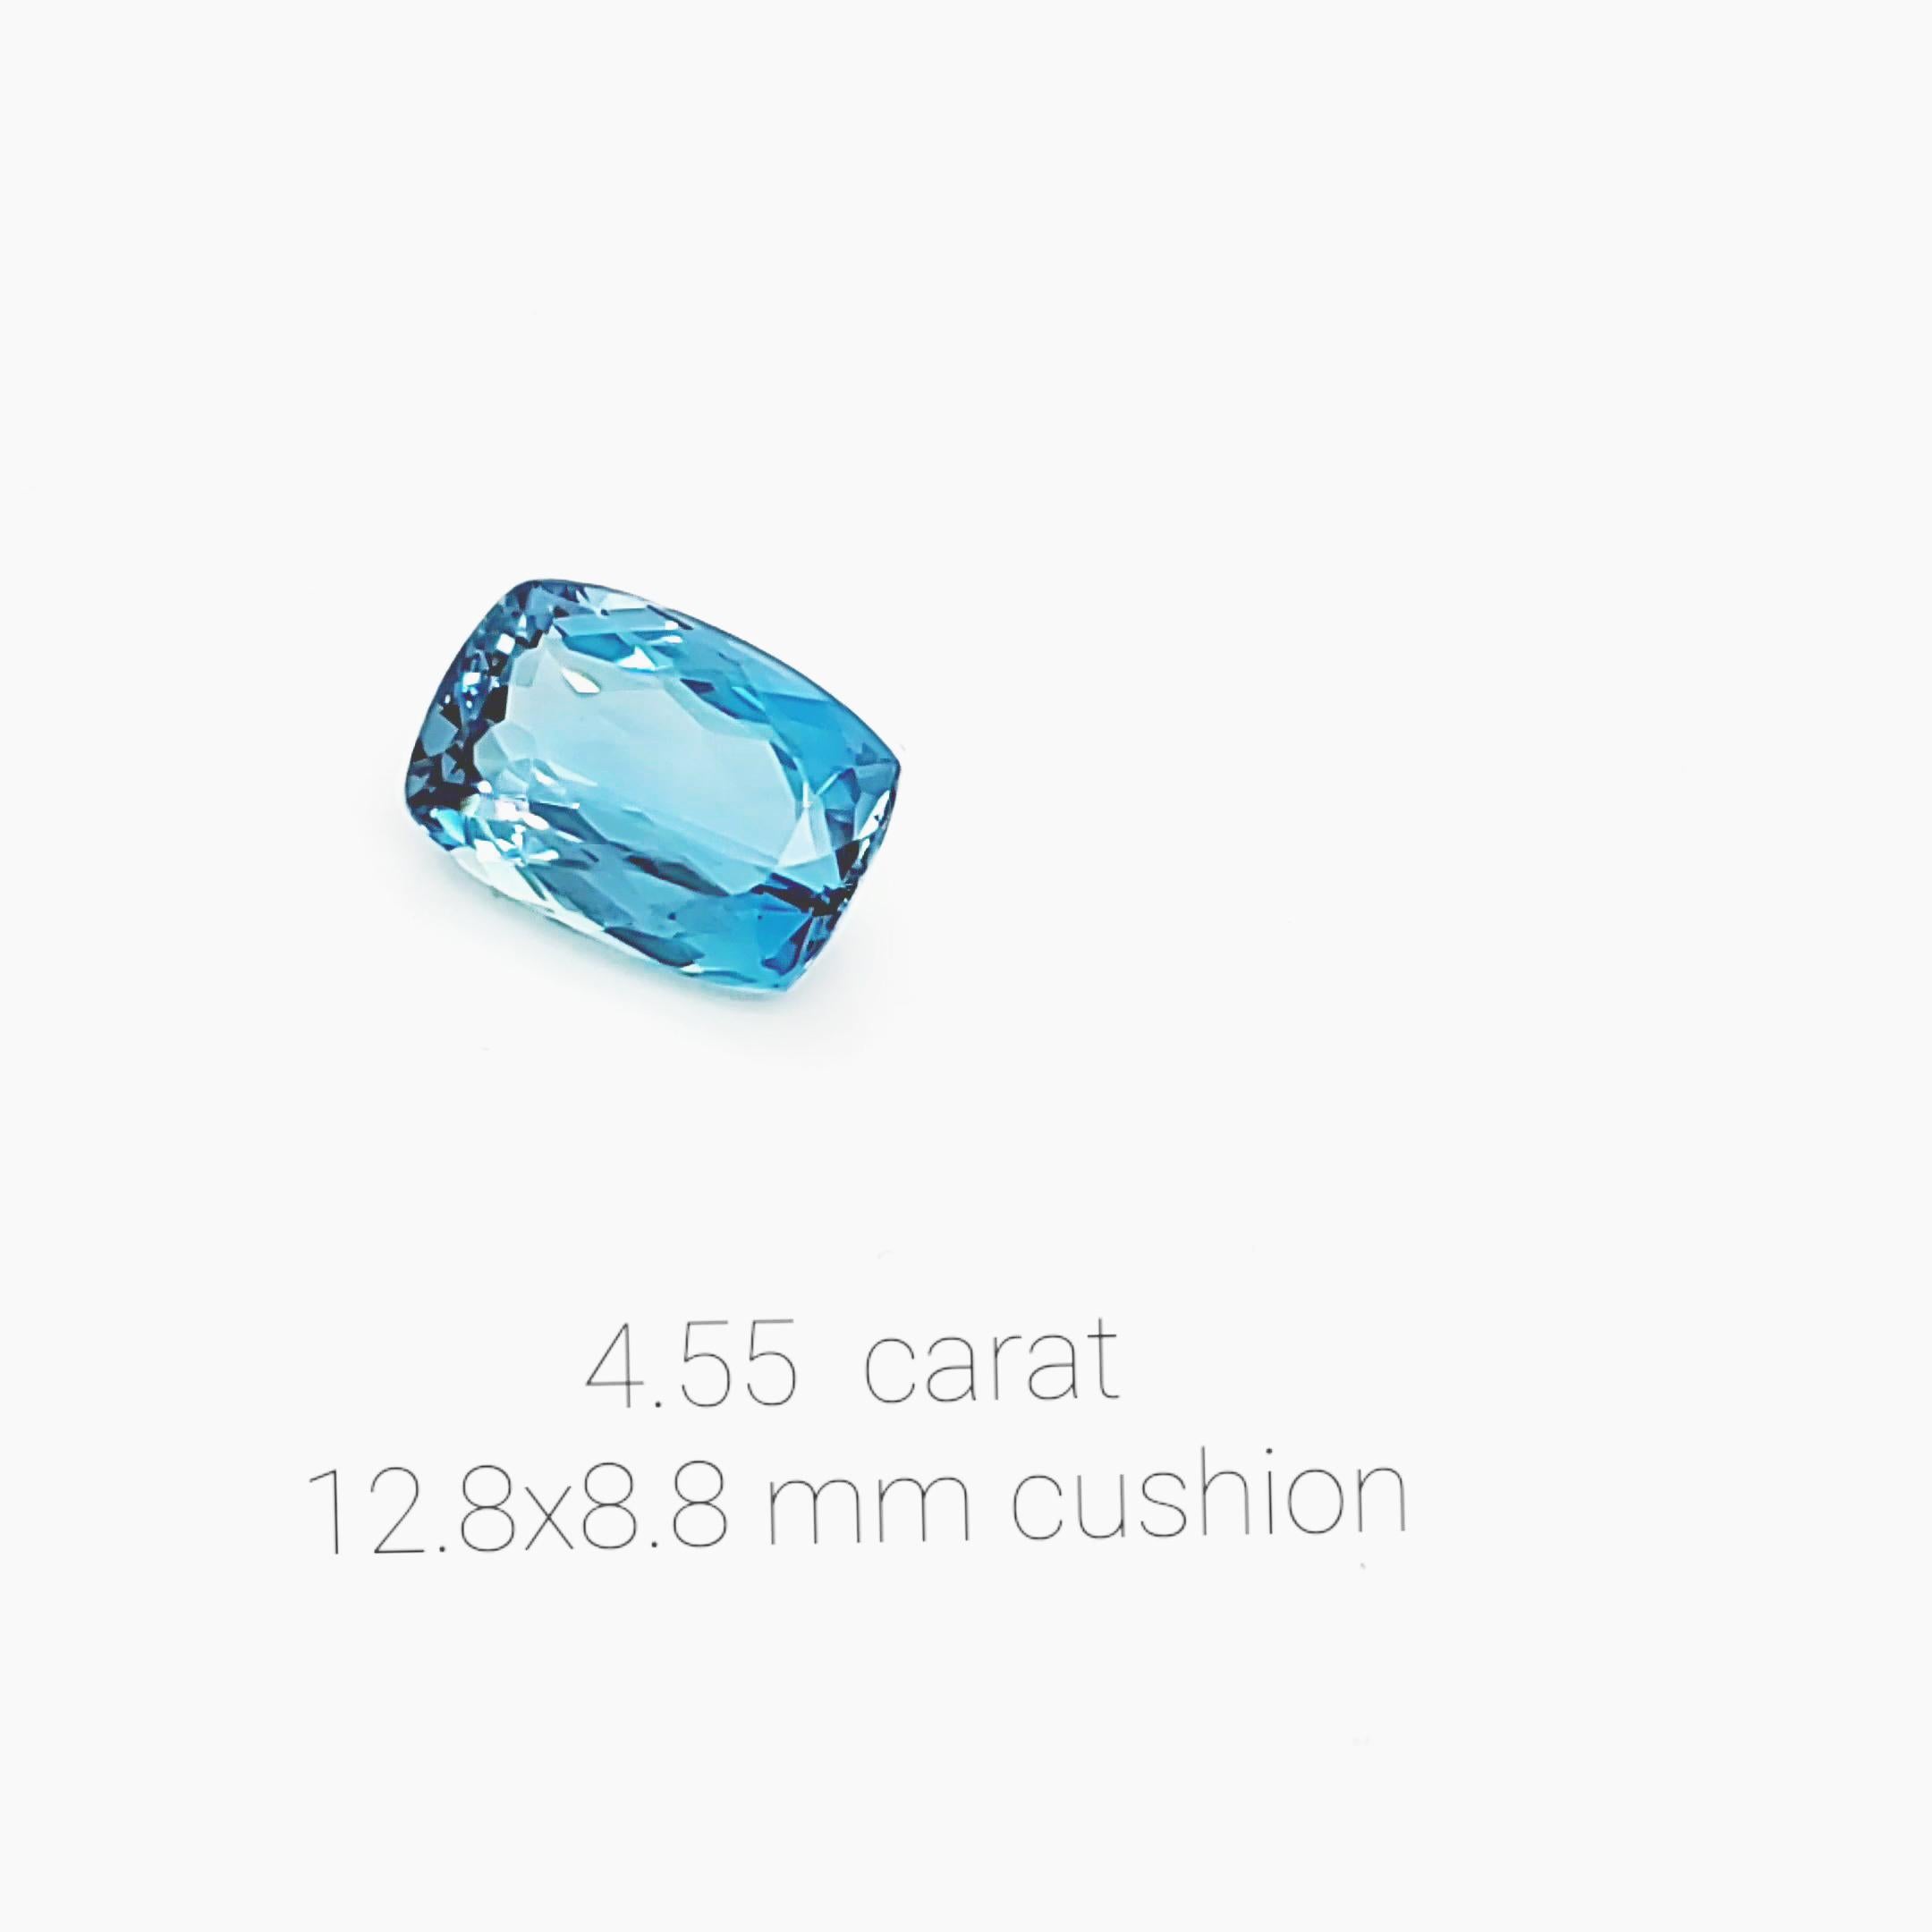 4.55 carat Natural Blue Cushion Aquamarine gemstone, of a high quality intense blue, transparent mineral with no inclusions, perfect choice for collectors or to commission a custom, unique piece of jewelry with it.
We are master jewelers with a vast